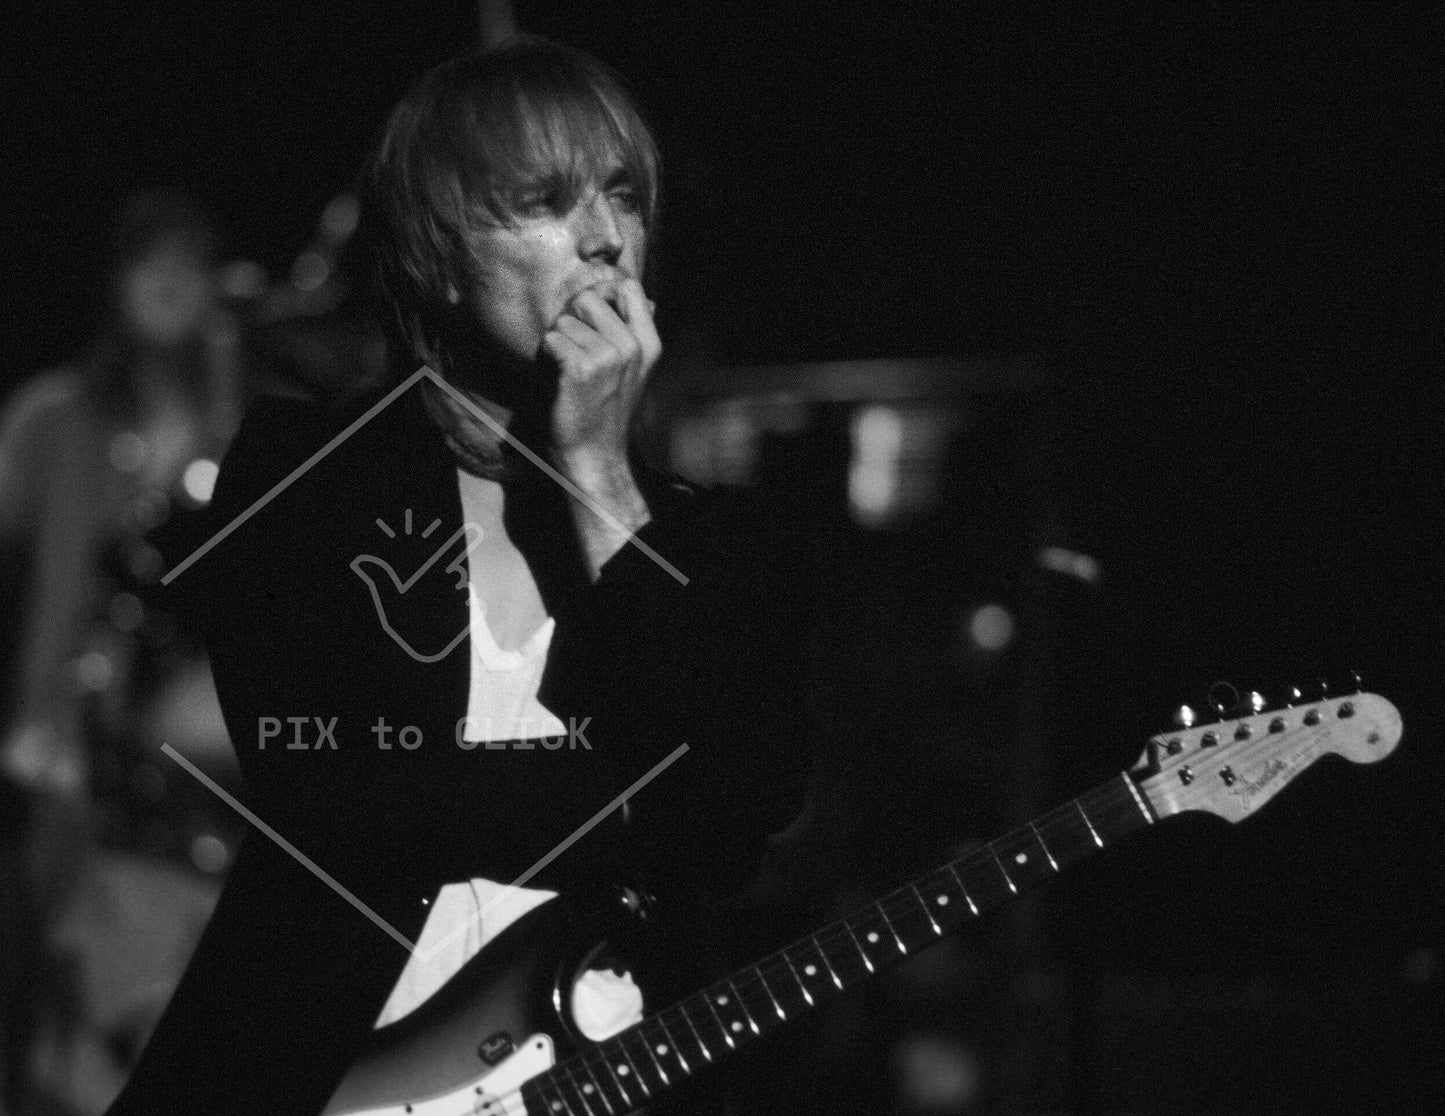 Tom Petty deep in thought - Nassau Coliseum -  Uniondale, NY - August 6, 1981